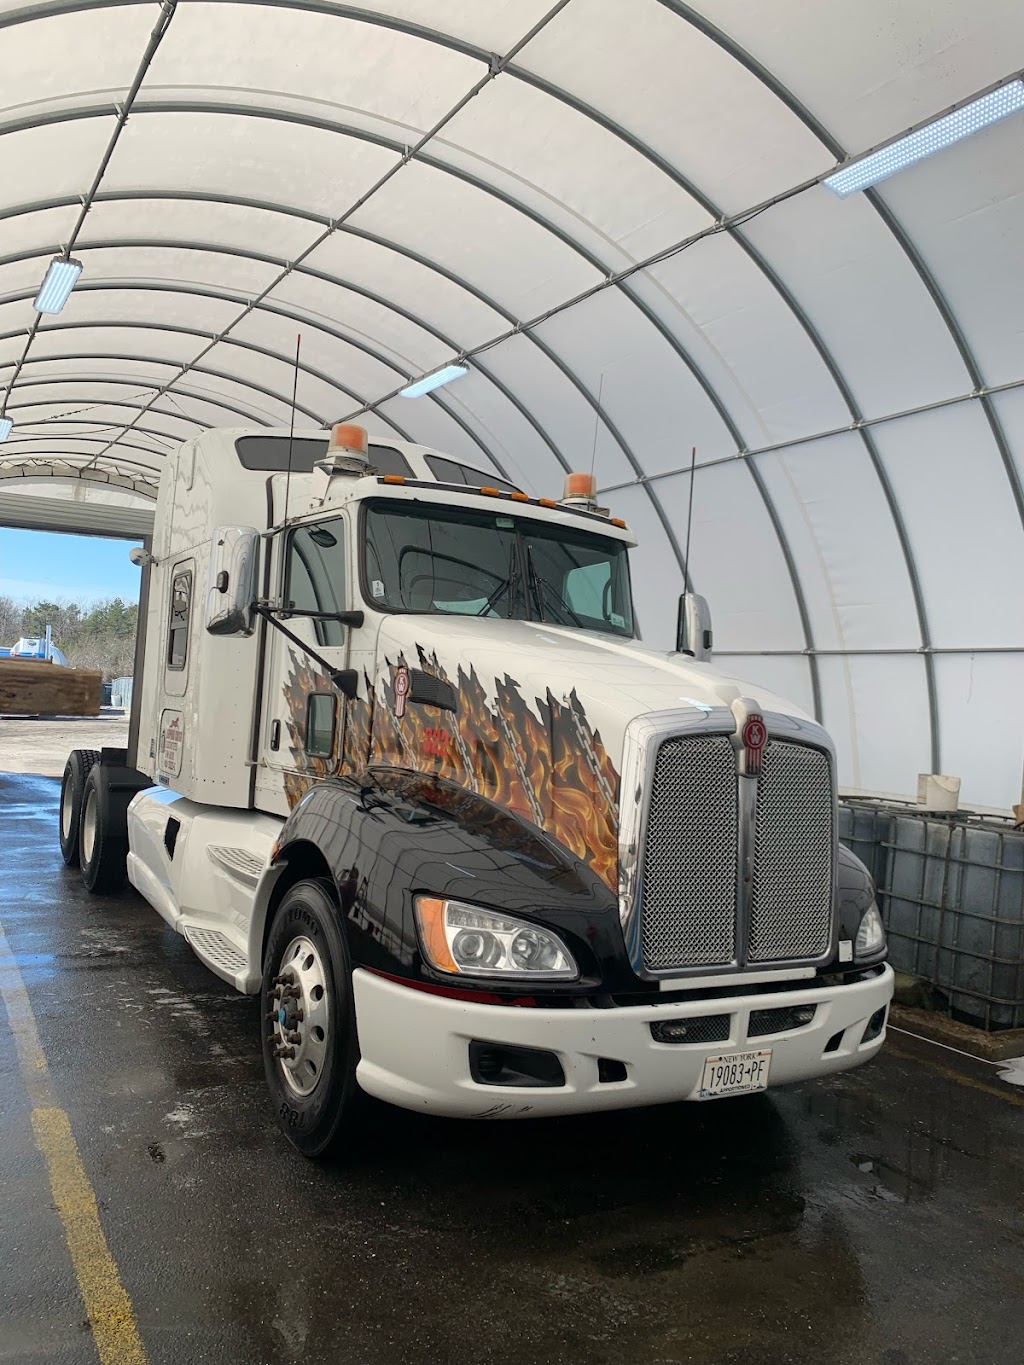 Exit 52 Truck Wash | 920 Crooked Hill Rd, Brentwood, NY 11717 | Phone: (631) 614-4723